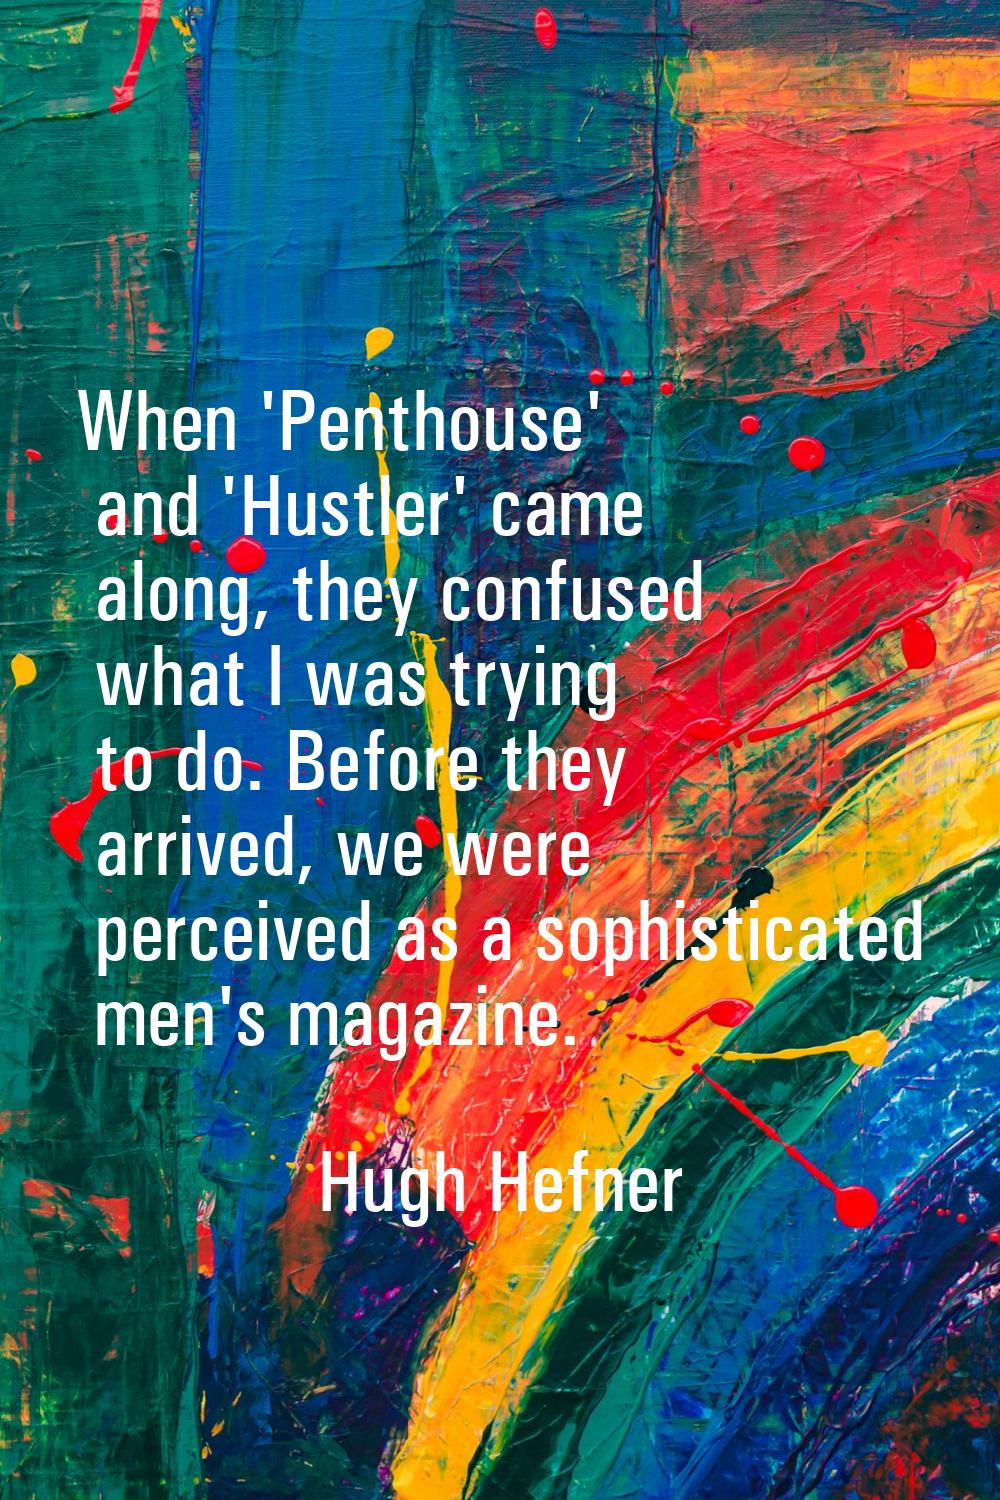 When 'Penthouse' and 'Hustler' came along, they confused what I was trying to do. Before they arriv